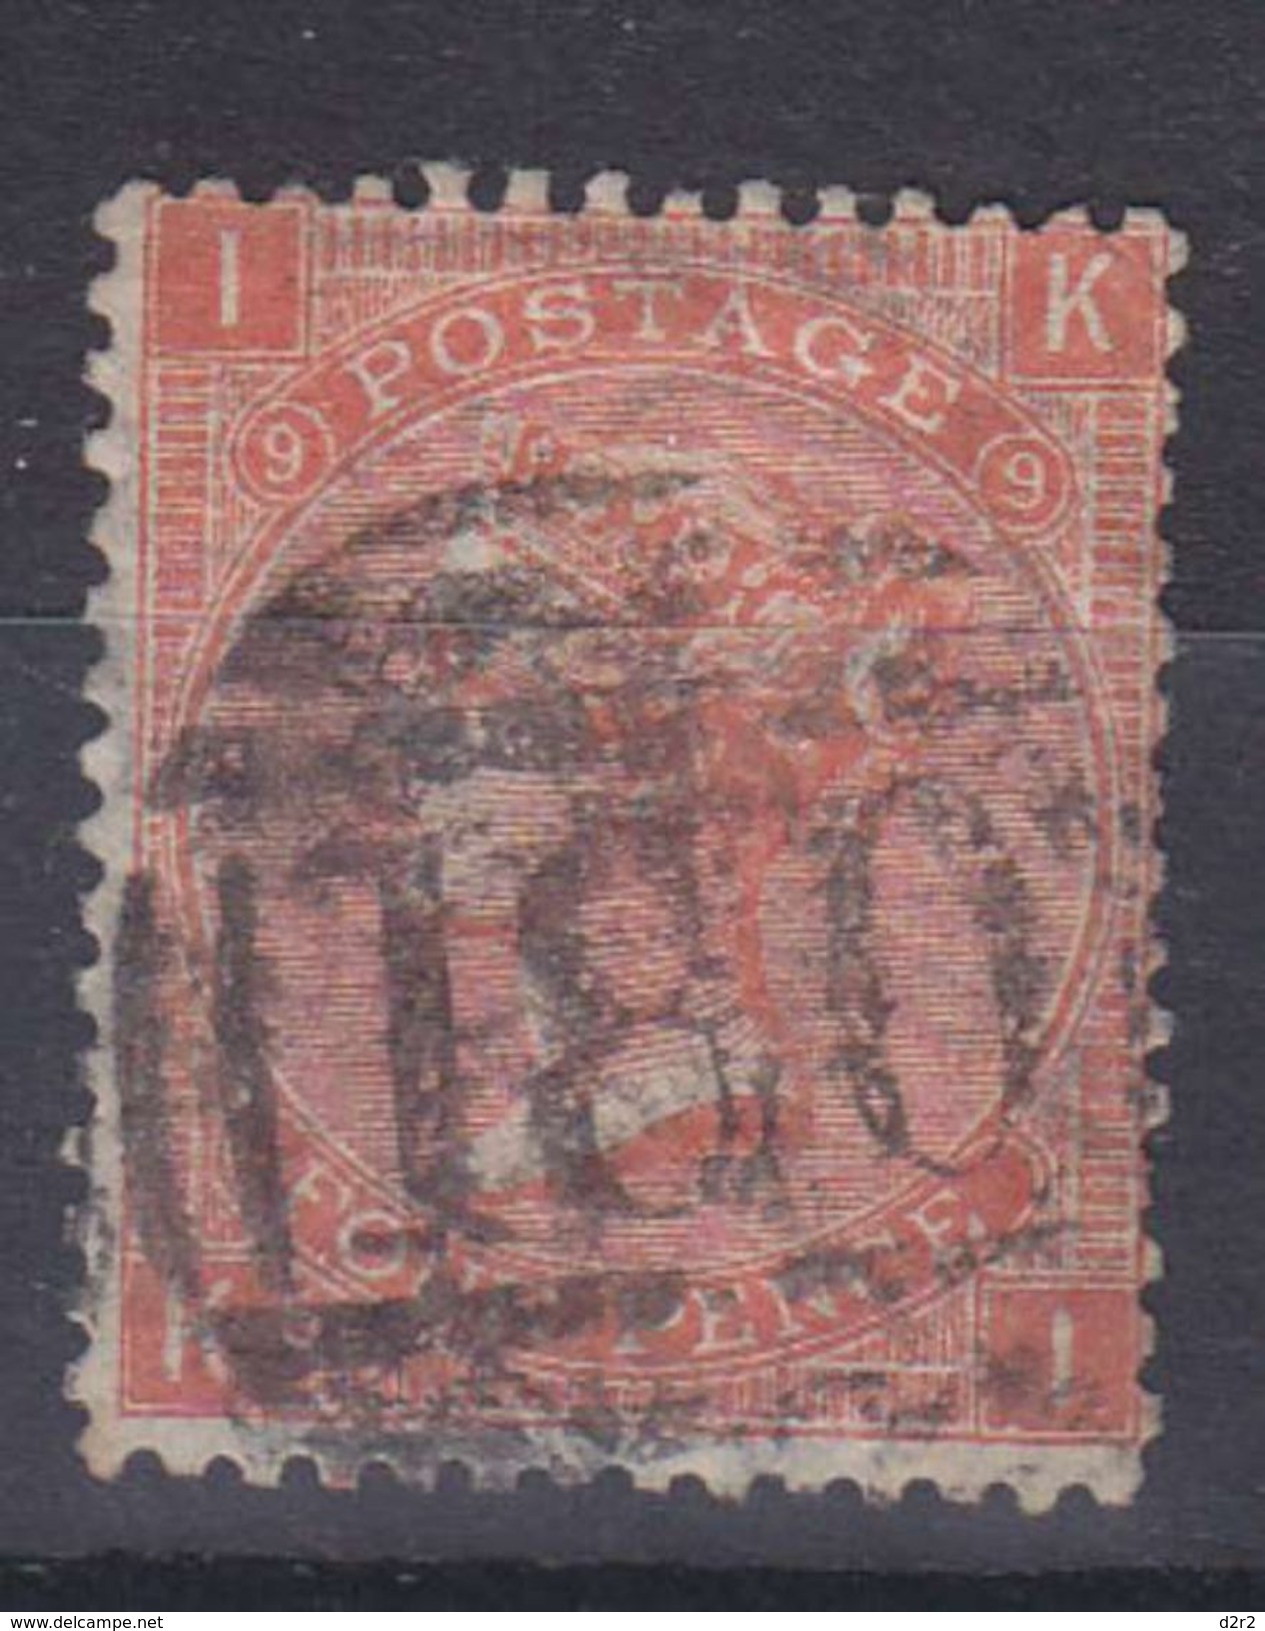 MICHEL NUM 13 - NON TRIE - - Used Stamps